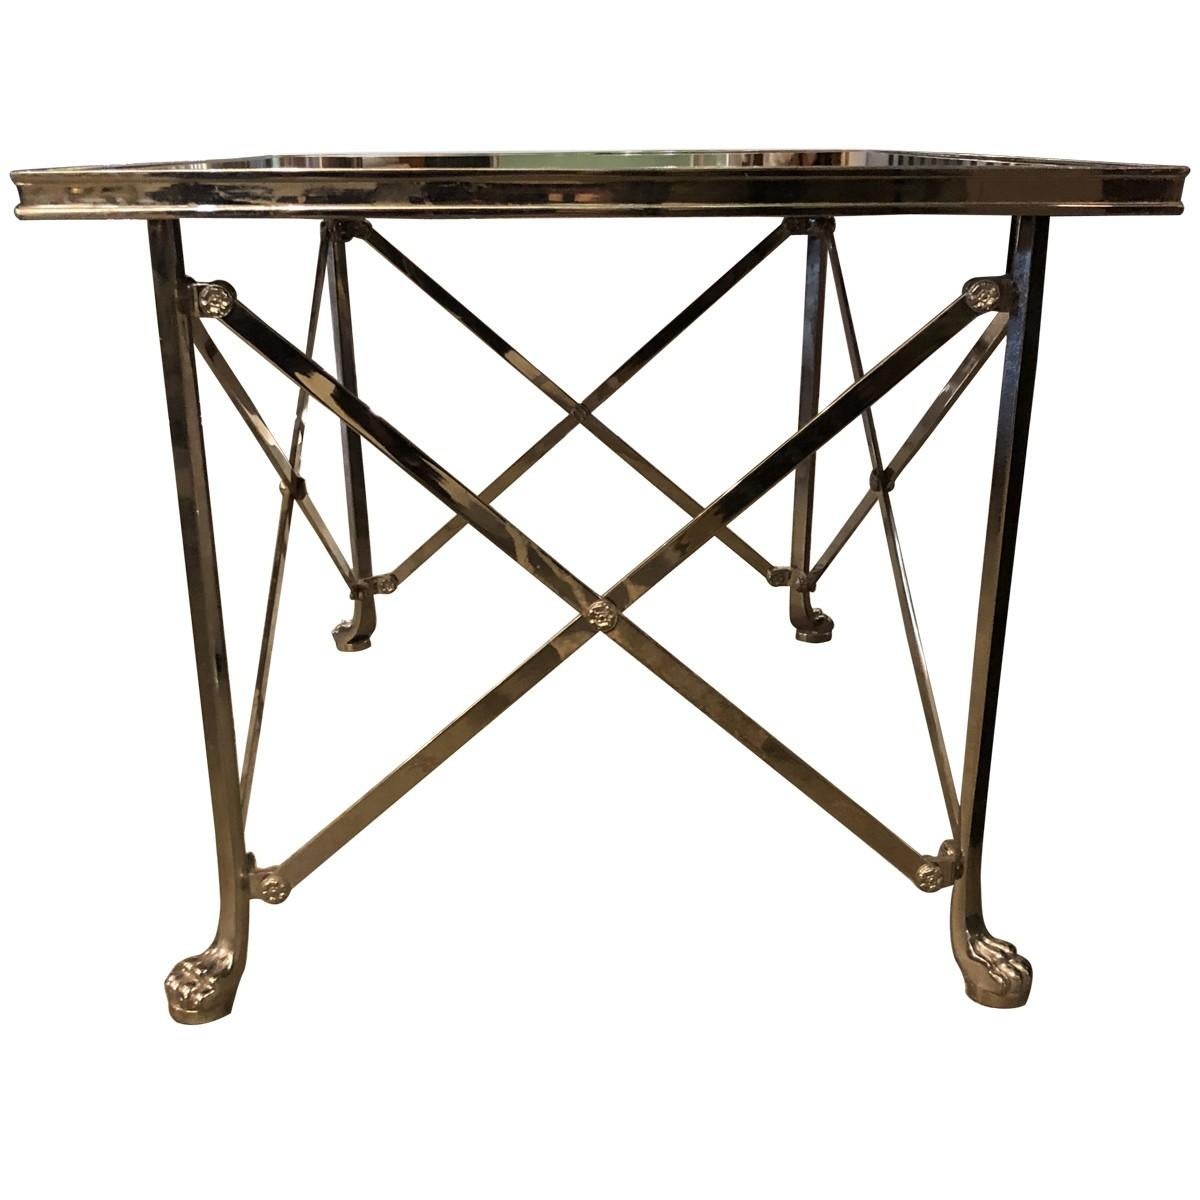 Ralph Lauren’s home furnishings and accessories reflect an enduring American style and the same level of phenomenal craftsmanship synonymous with his clothing. These contemporary Bel Air tables are suitable for use together as a coffee table or as